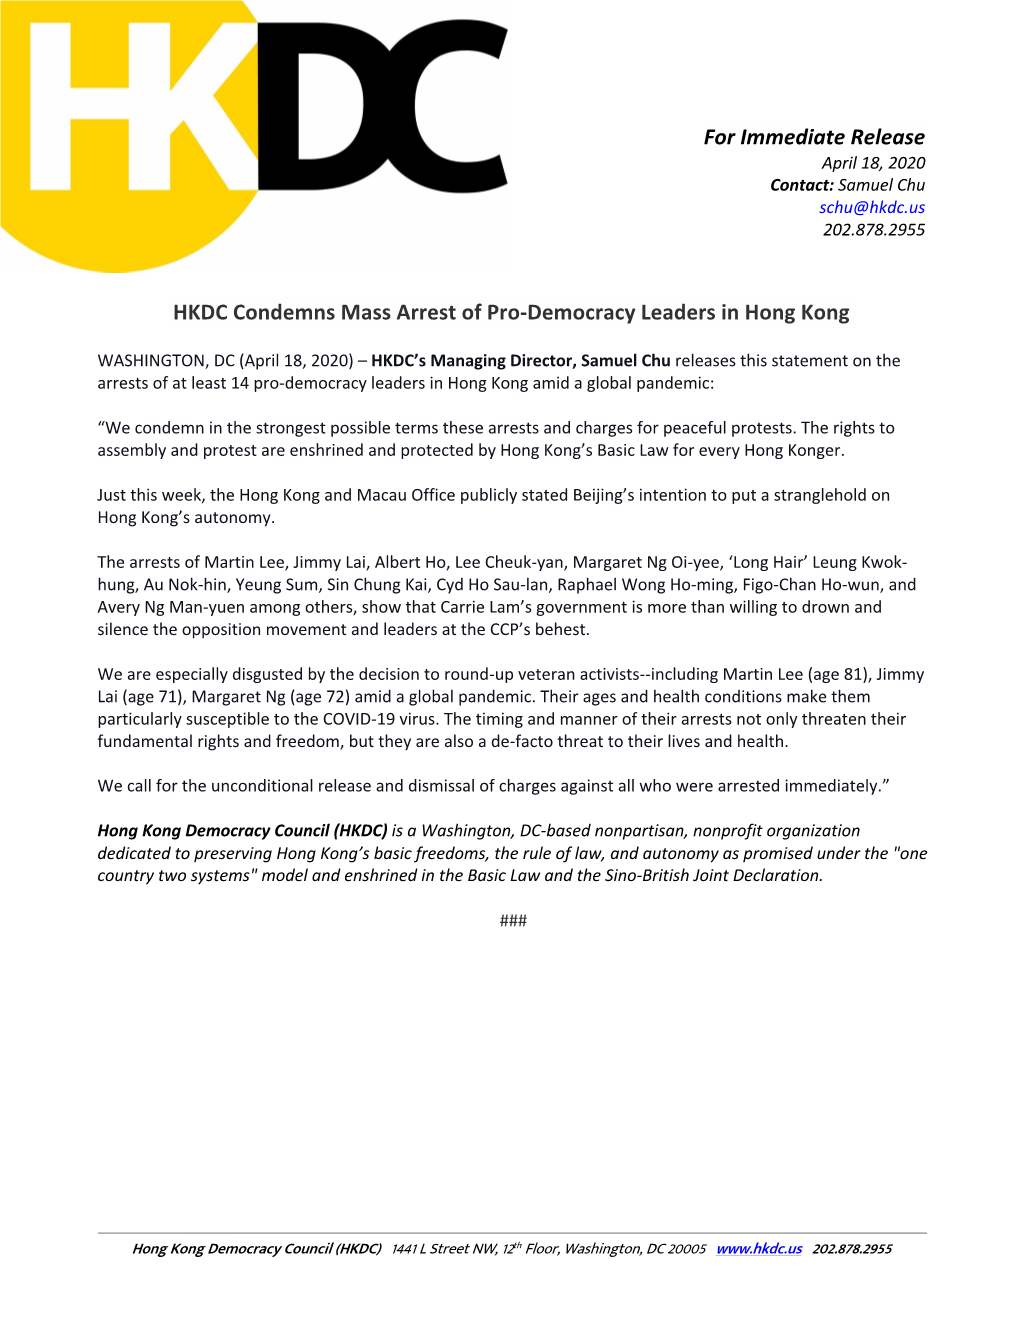 HKDC Condemns Mass Arrest of Pro-Democracy Leaders in Hong Kong